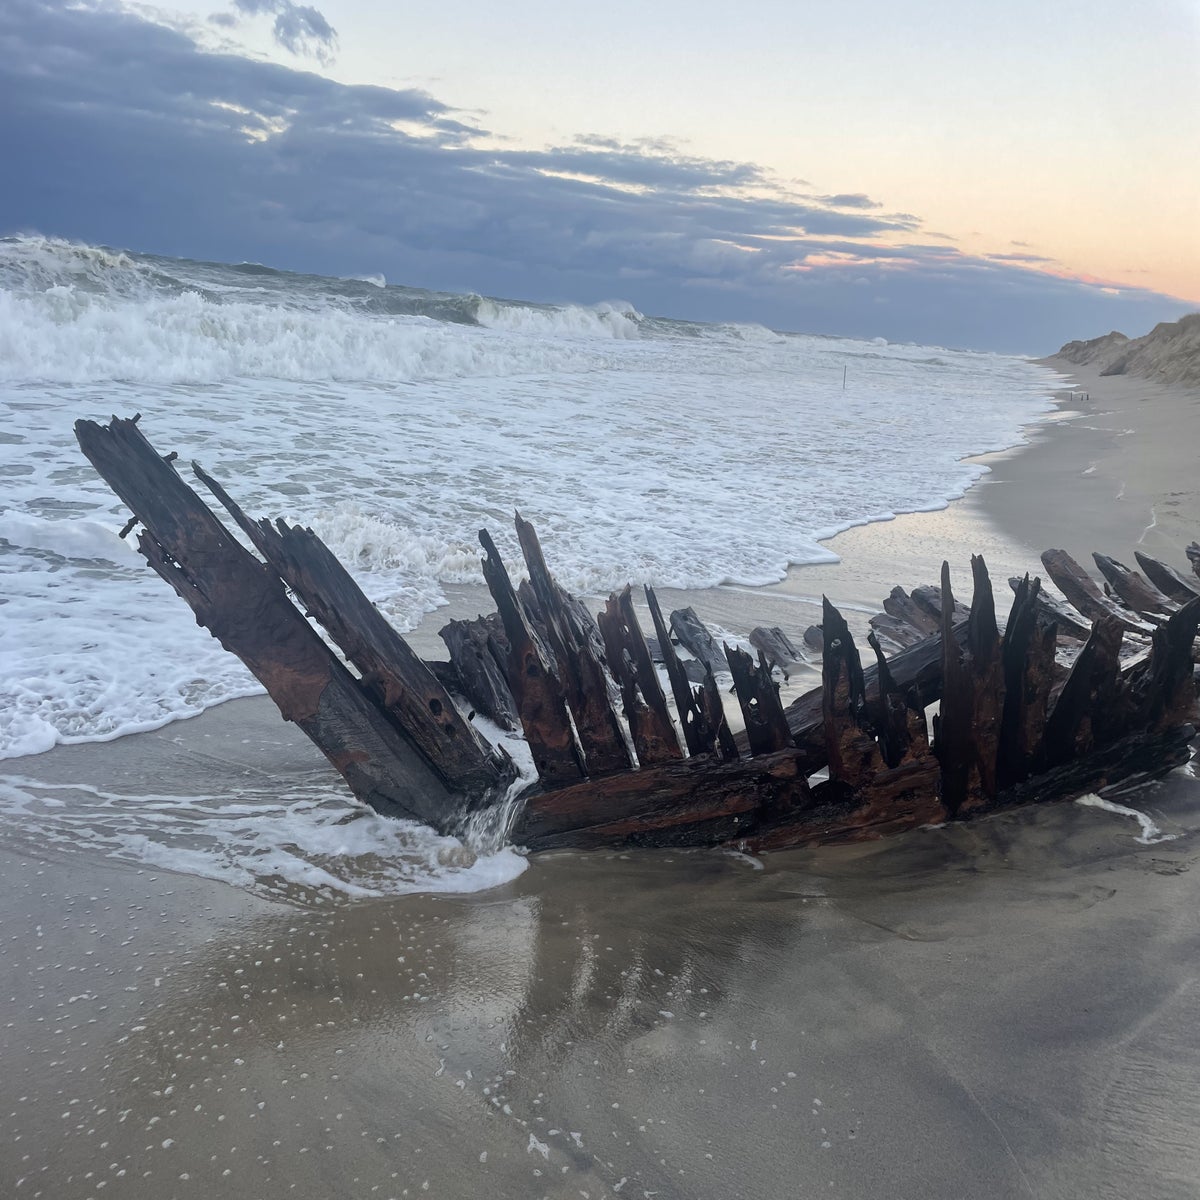 Shipwreck Uncovered on Nantucket Island